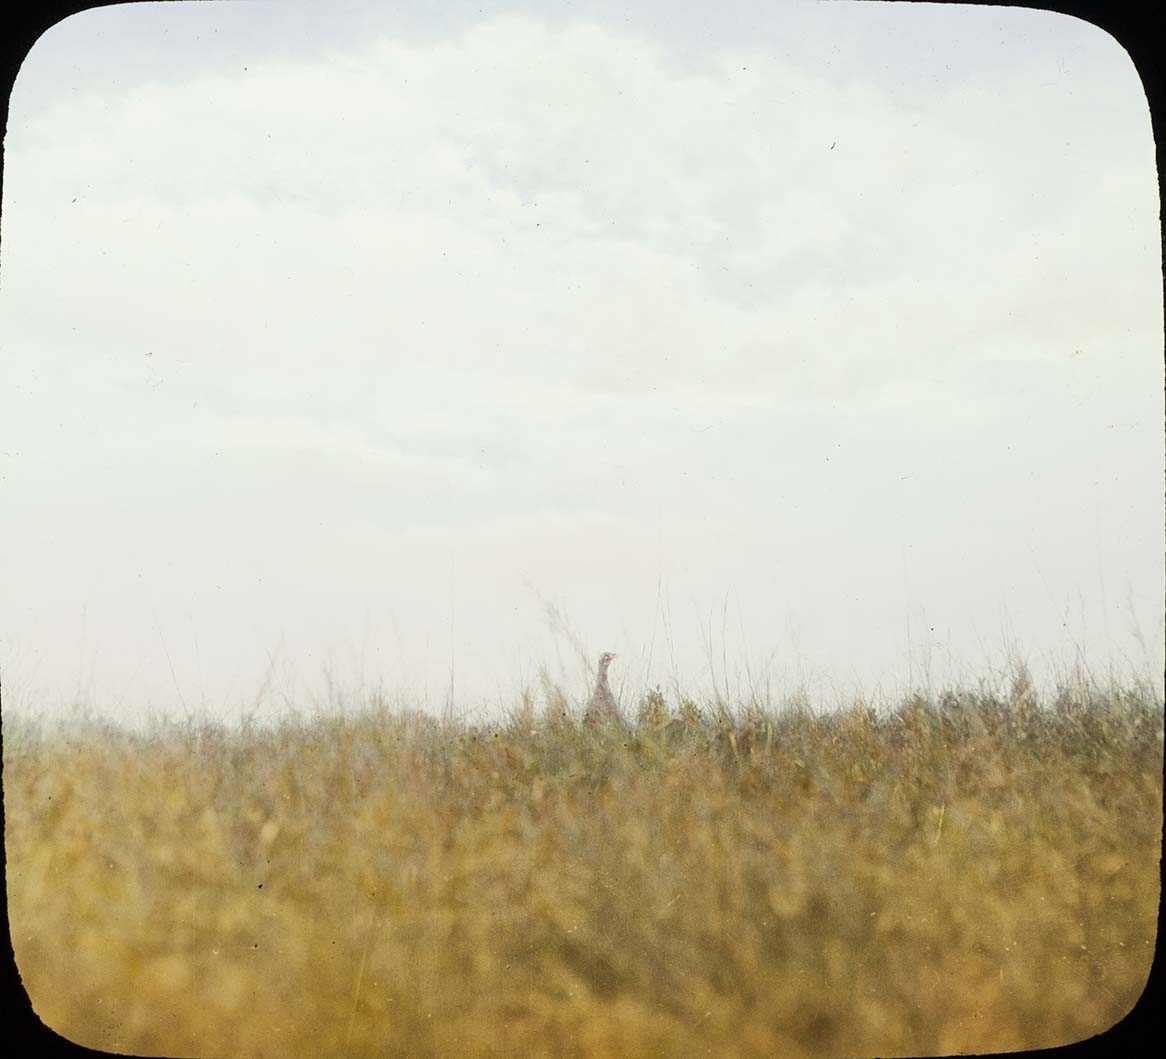 Lantern slide of a Sharp-tailed Grouse in a field